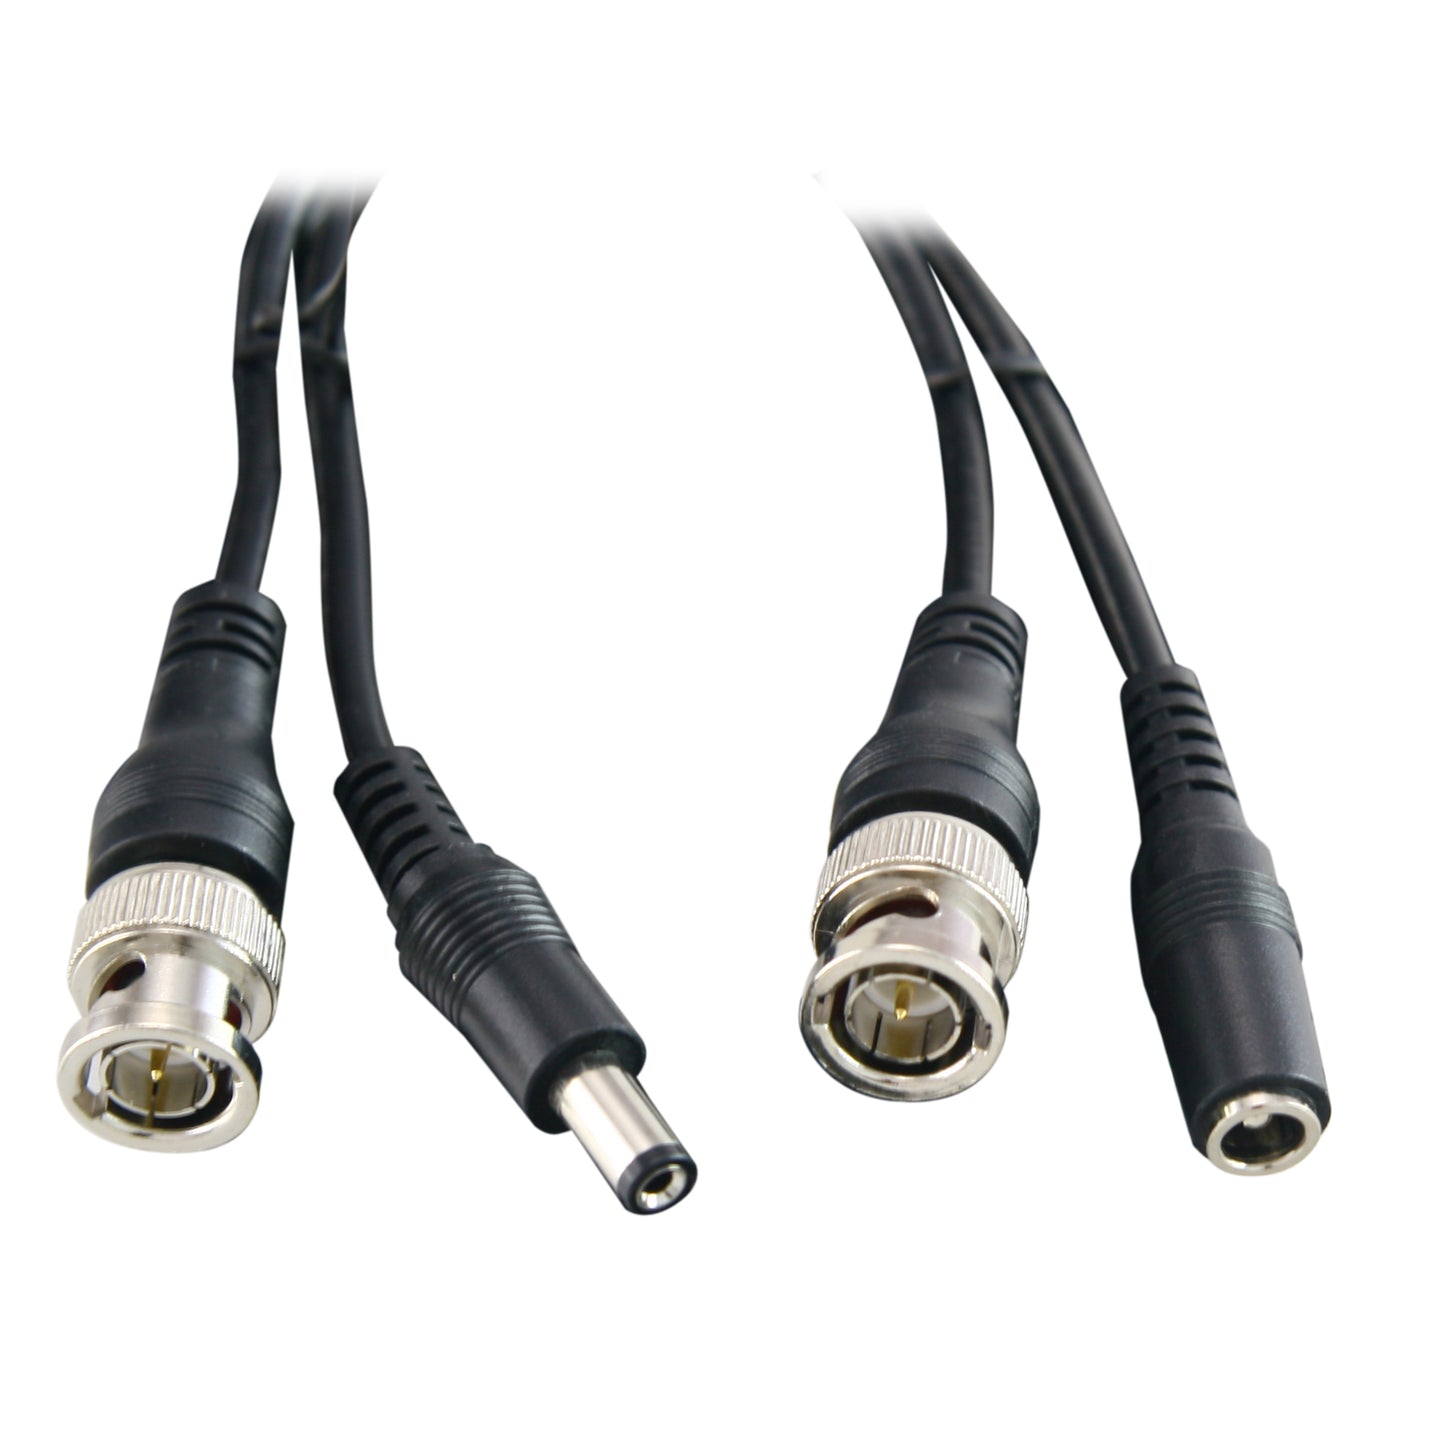 Combined RG59 + DC cable - BNC connector - 20 meters - Video - Power supply - Low loss